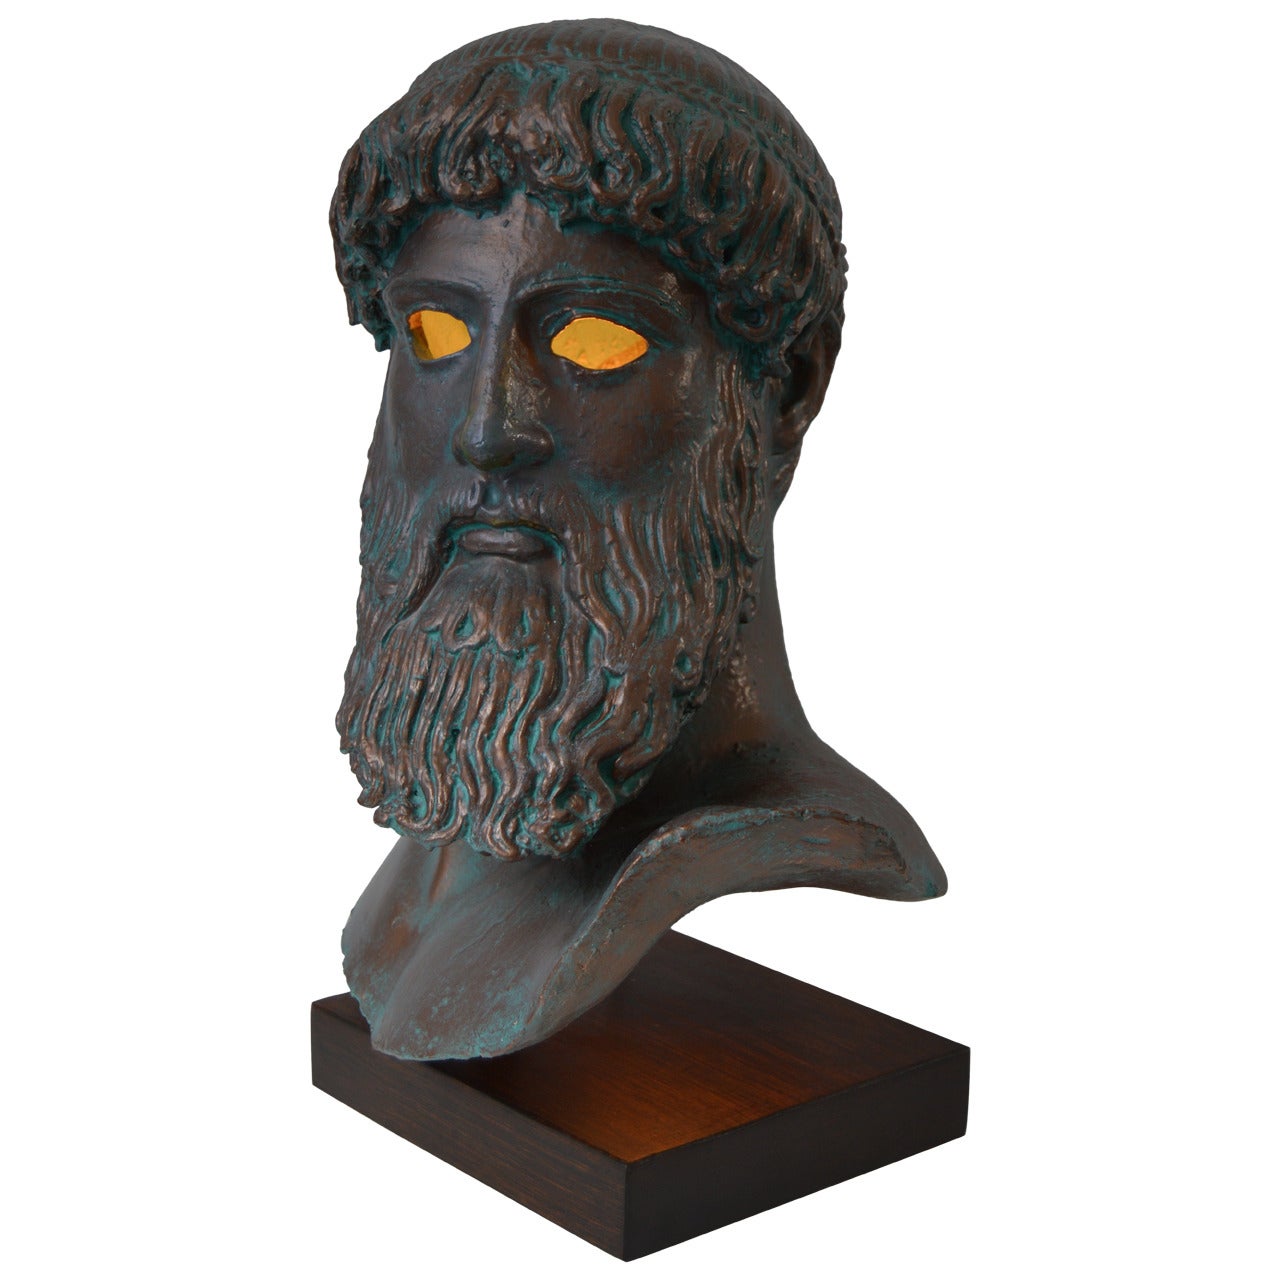 Illuminated-Sculpture of the "Artemision Zeus" or "God from the Sea": Modern